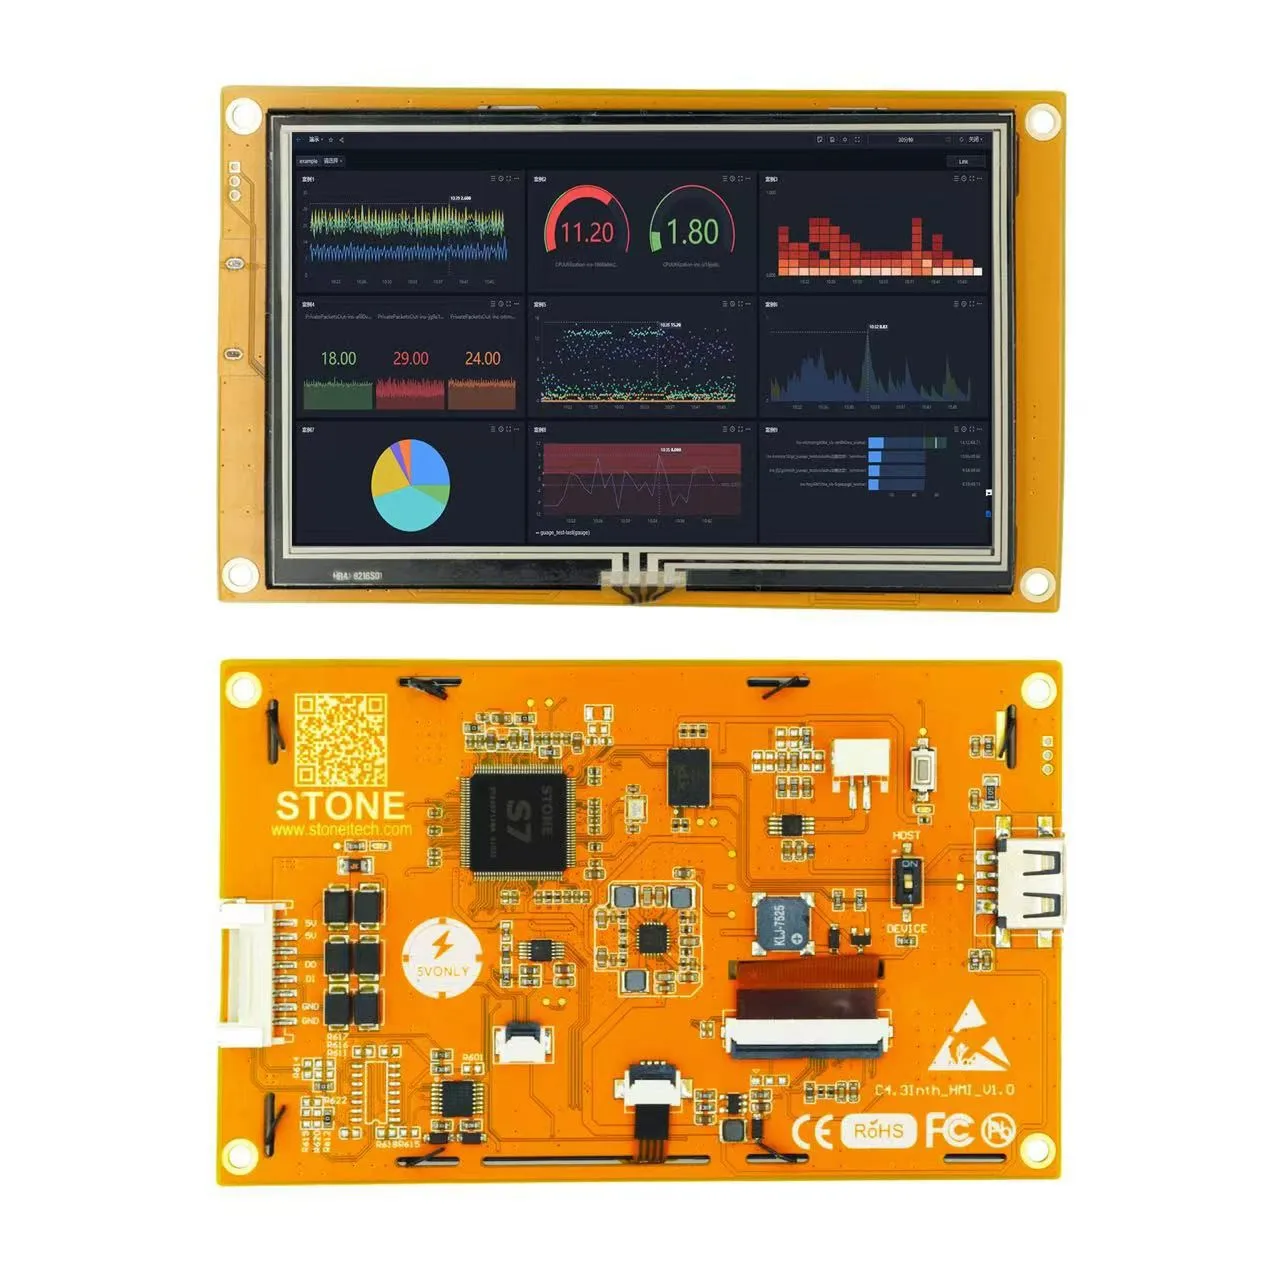 4.3 Inch LCD-TFT HMI Display Module Intelligent Series RGB 262K Color Resistive Touch Panel for Industrial Equipment Control